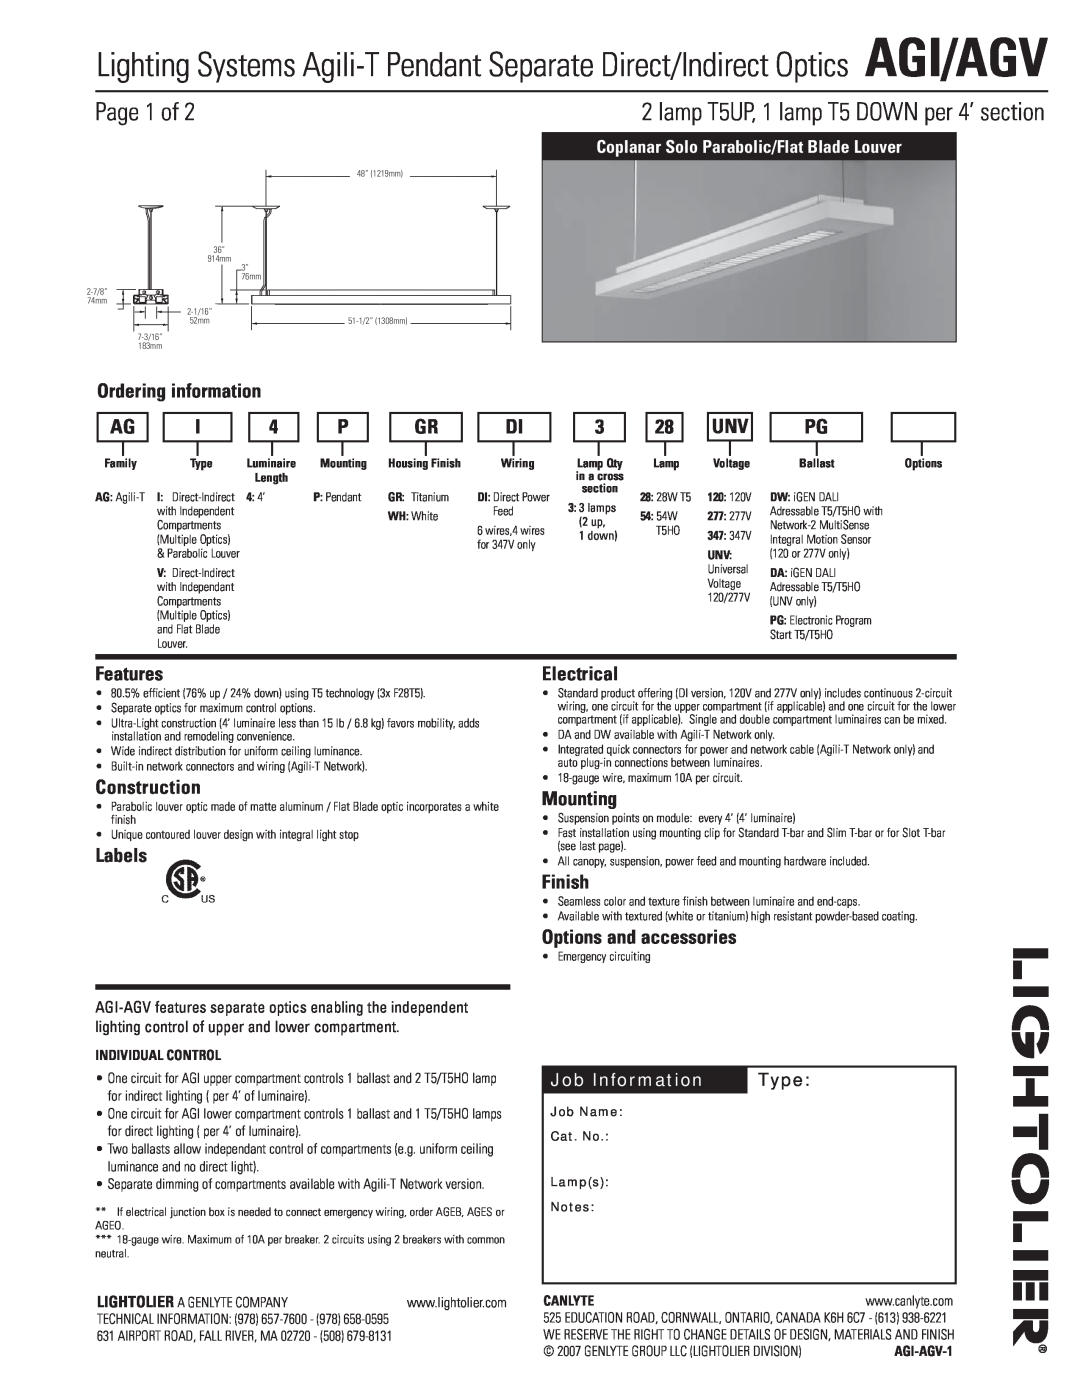 Lightolier AGI, AGV manual Page 1 of, lamp T5UP, 1 lamp T5 DOWN per 4’ section 